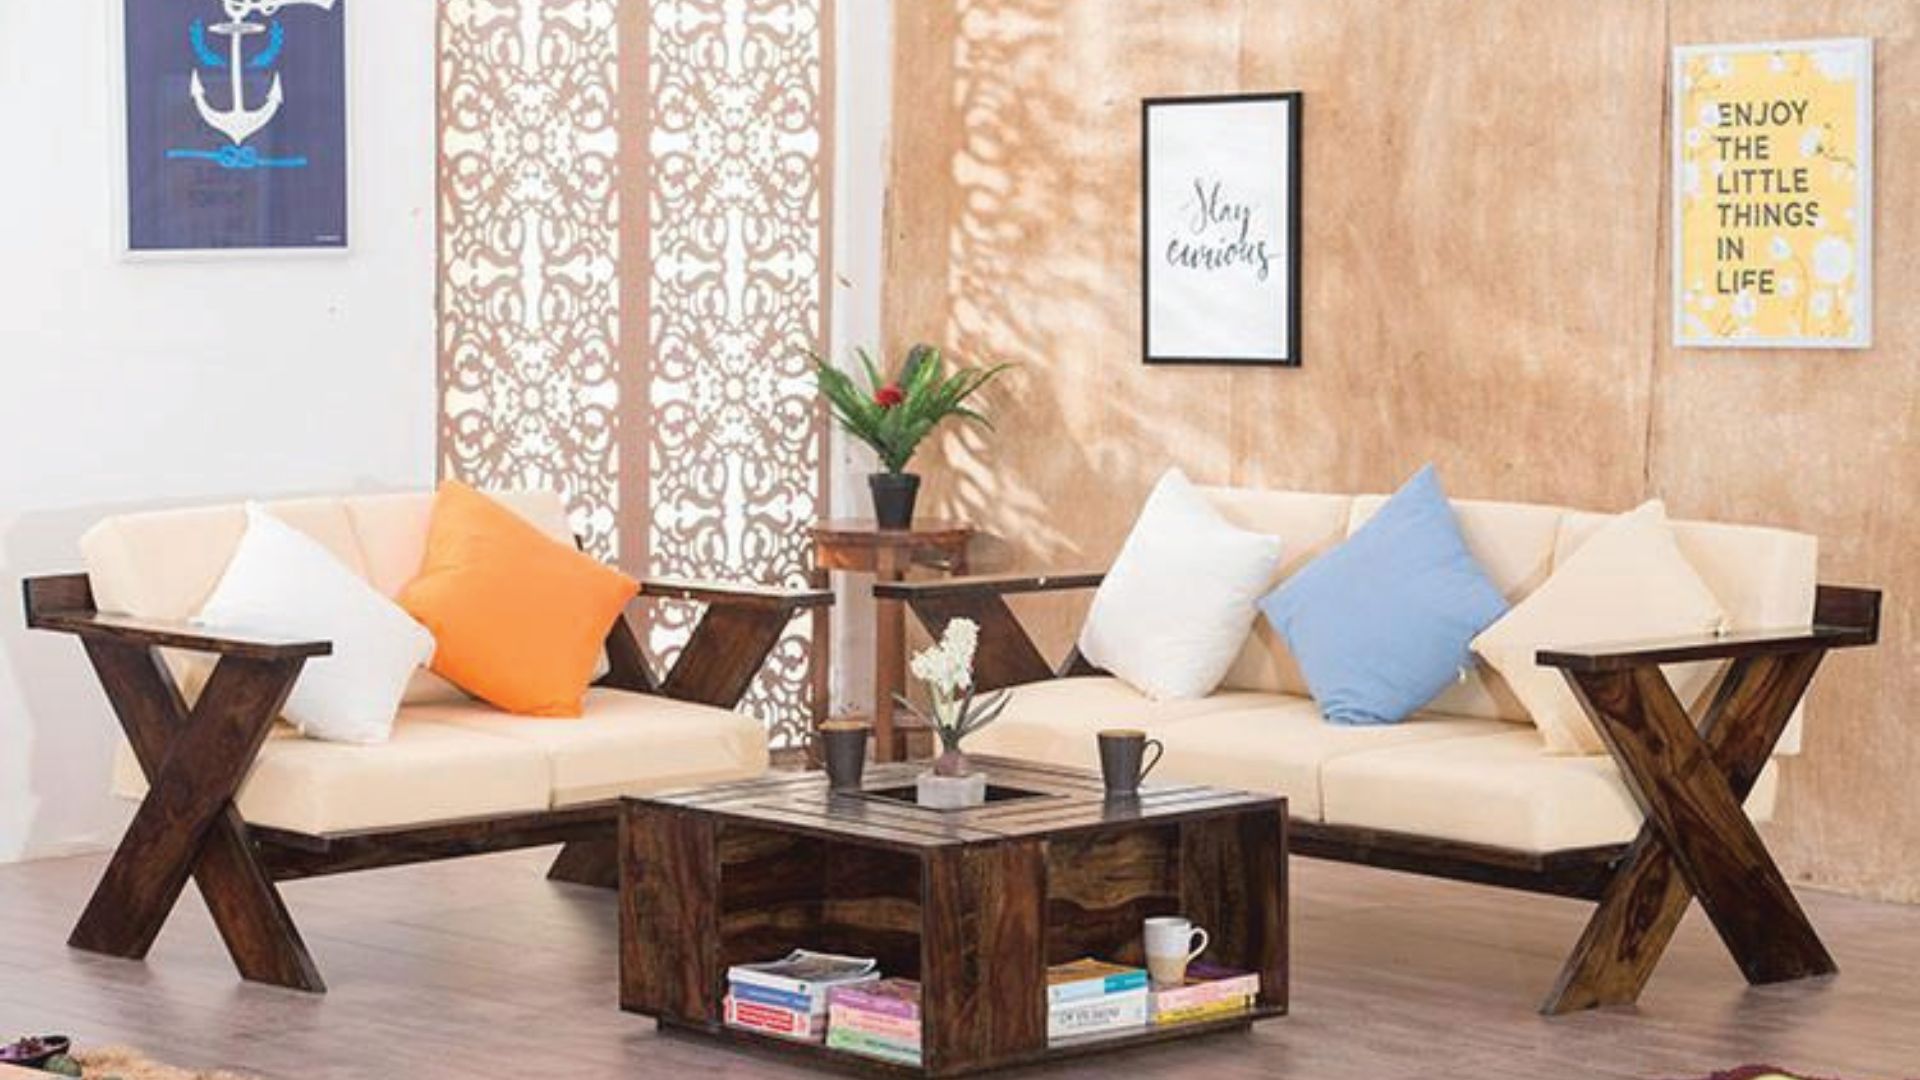 Luxury on a budget: Transform your home with affordable wooden furniture